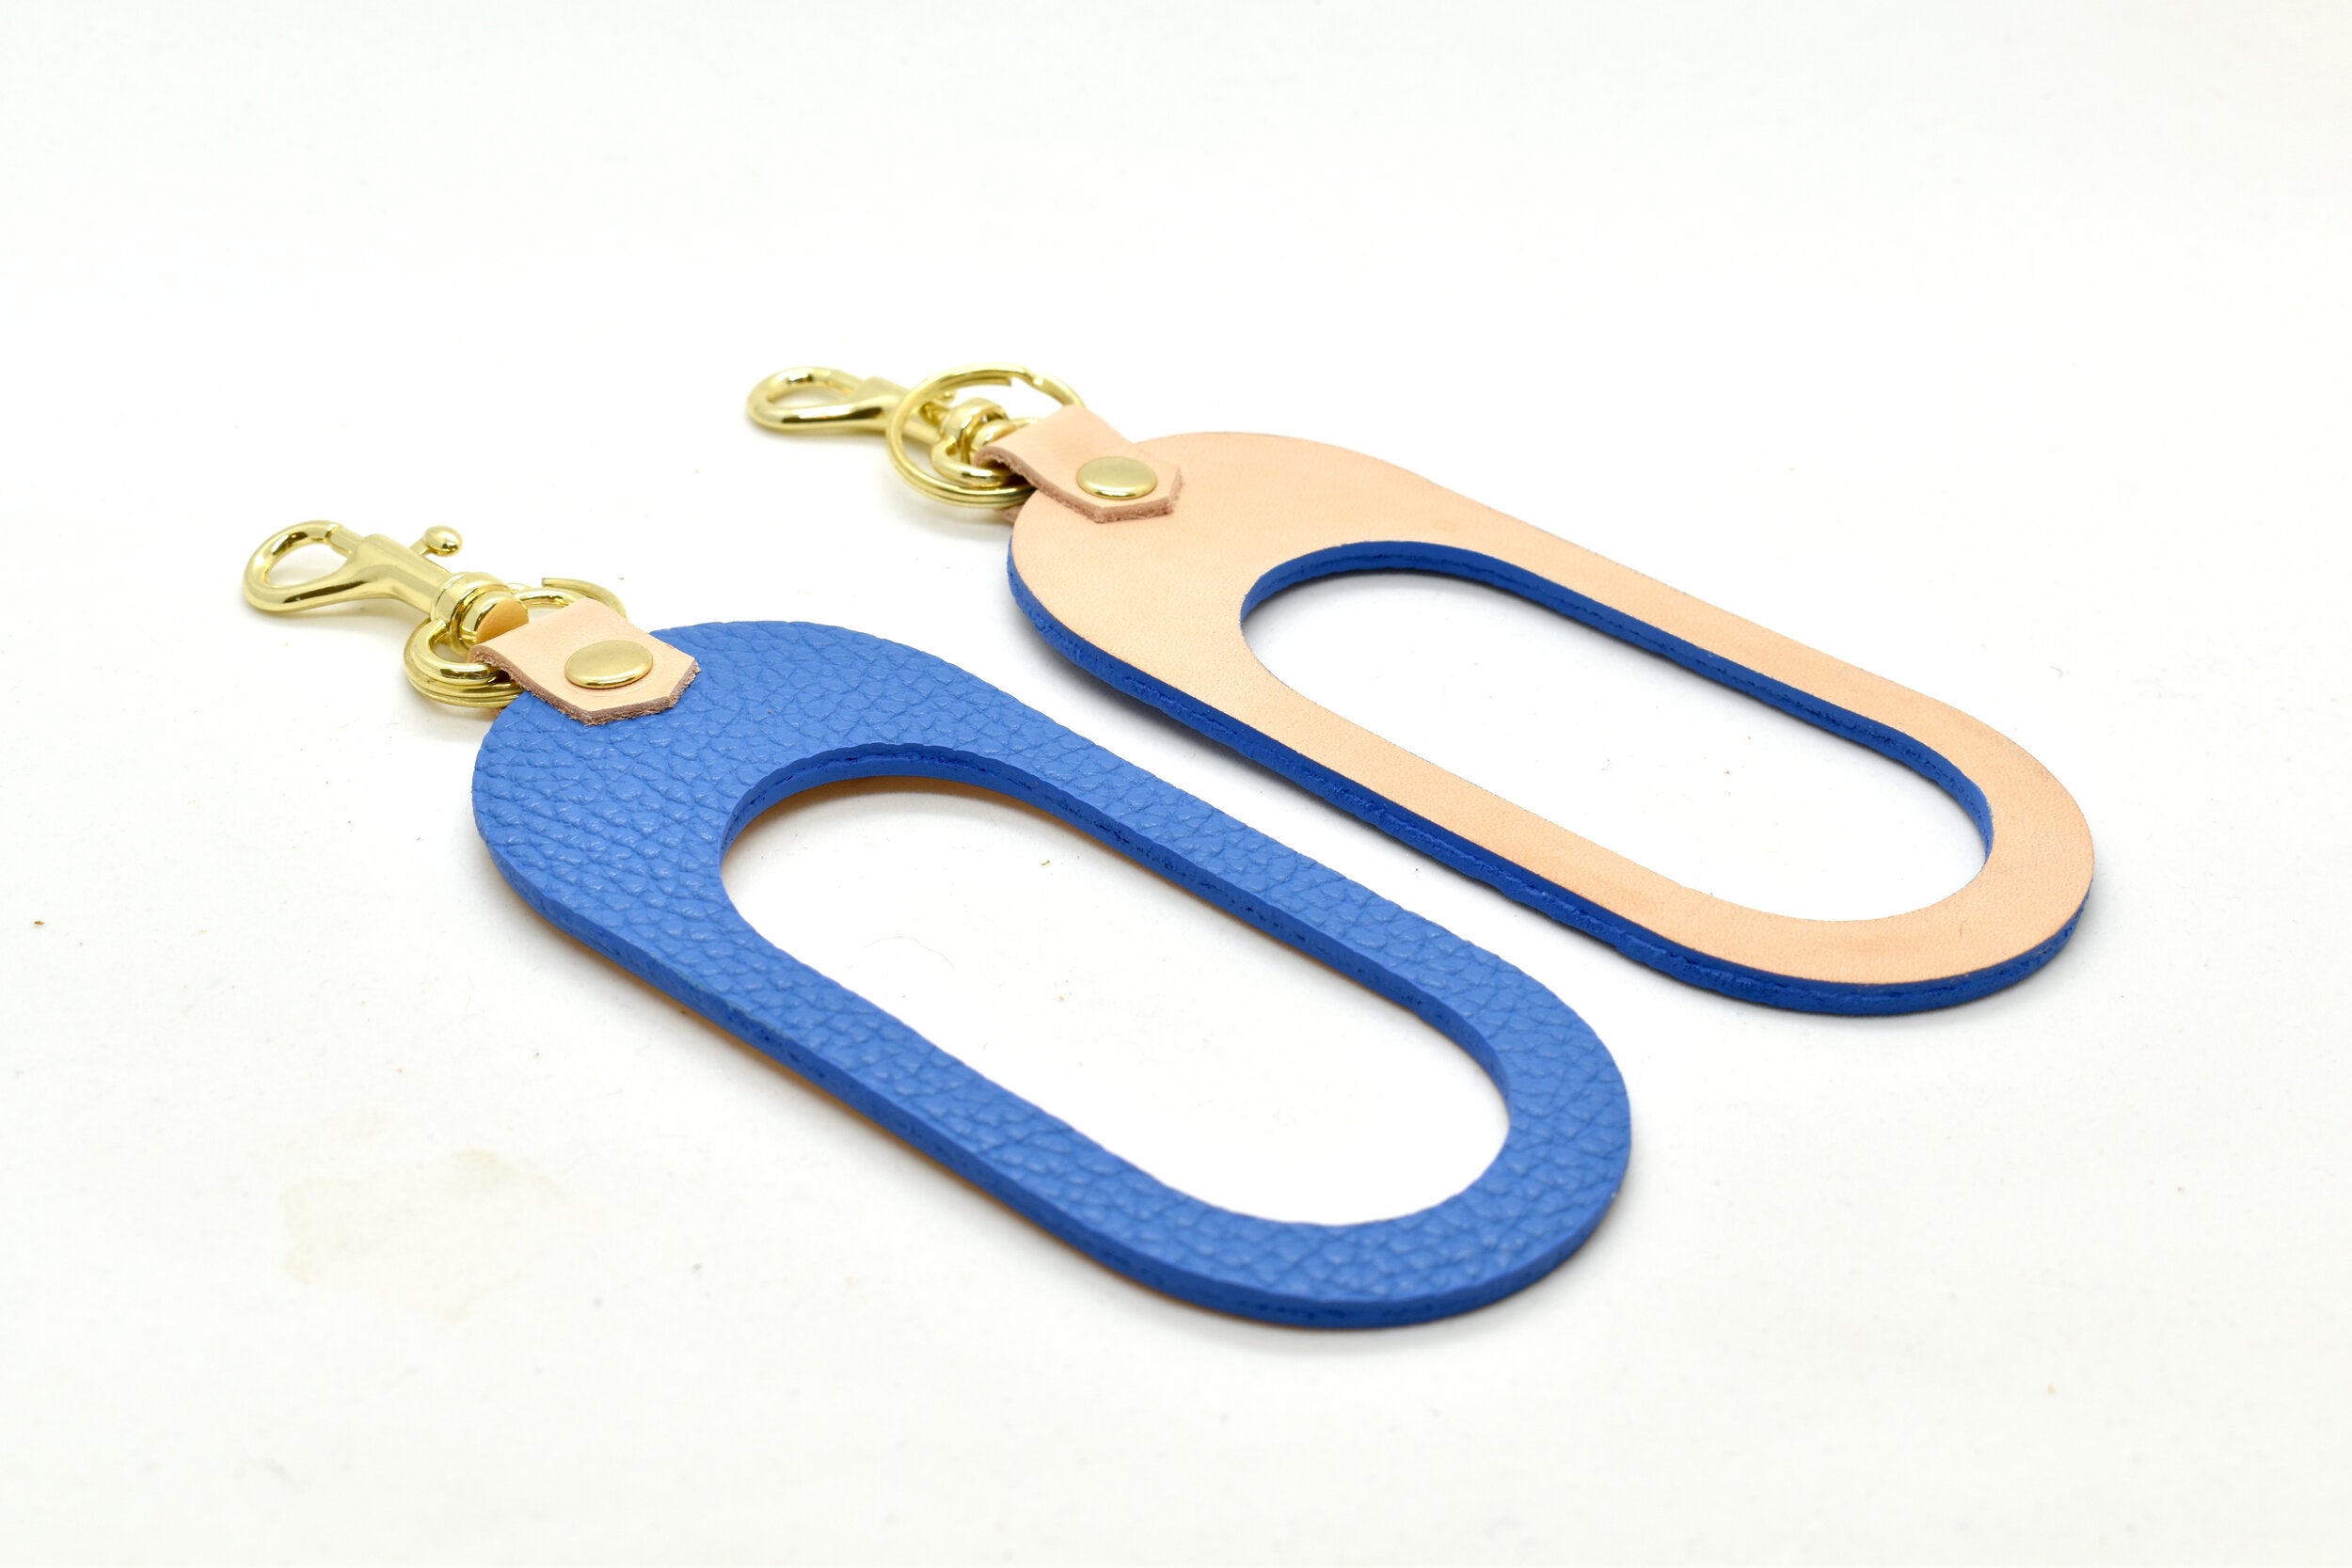 Modern Keychain Wristlet in Matisse Blue and Veg Tanned Leather